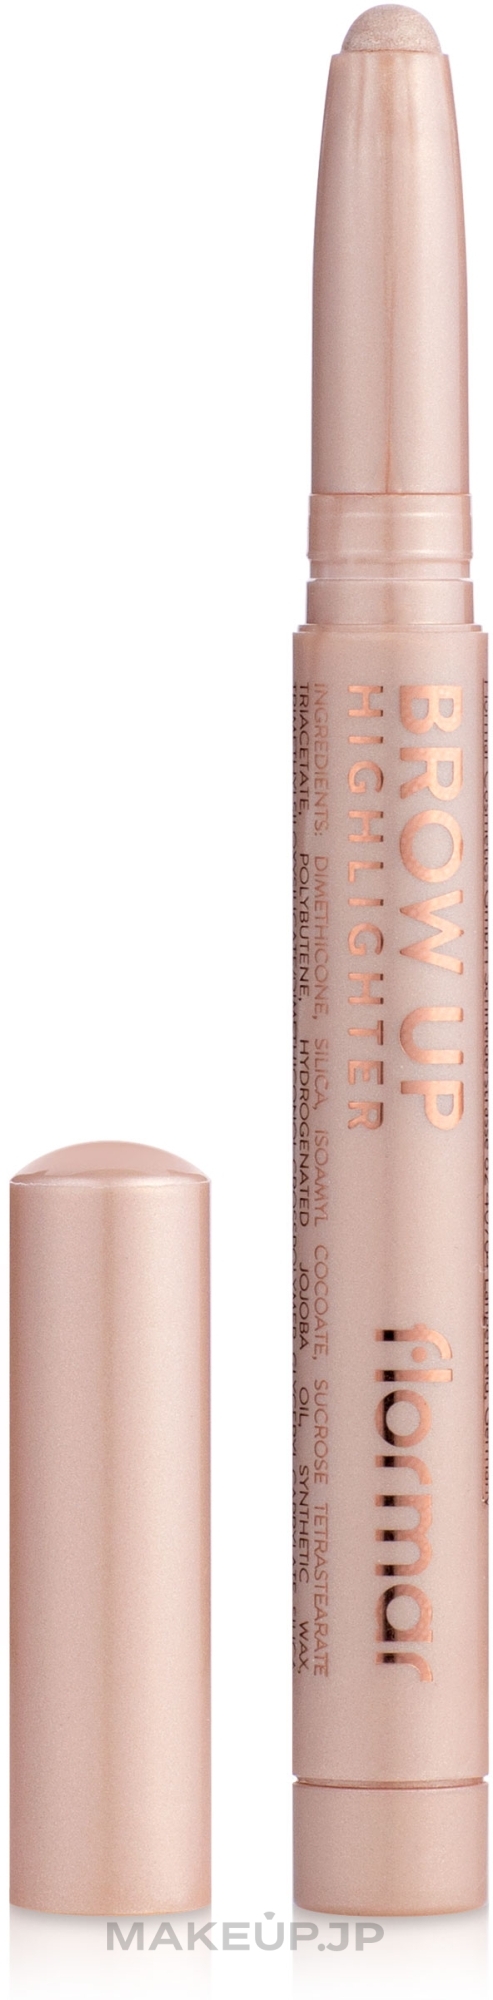 Brow Highlighter Pencil - Flormar Brow Up Highlighter — photo 000 - Champagne